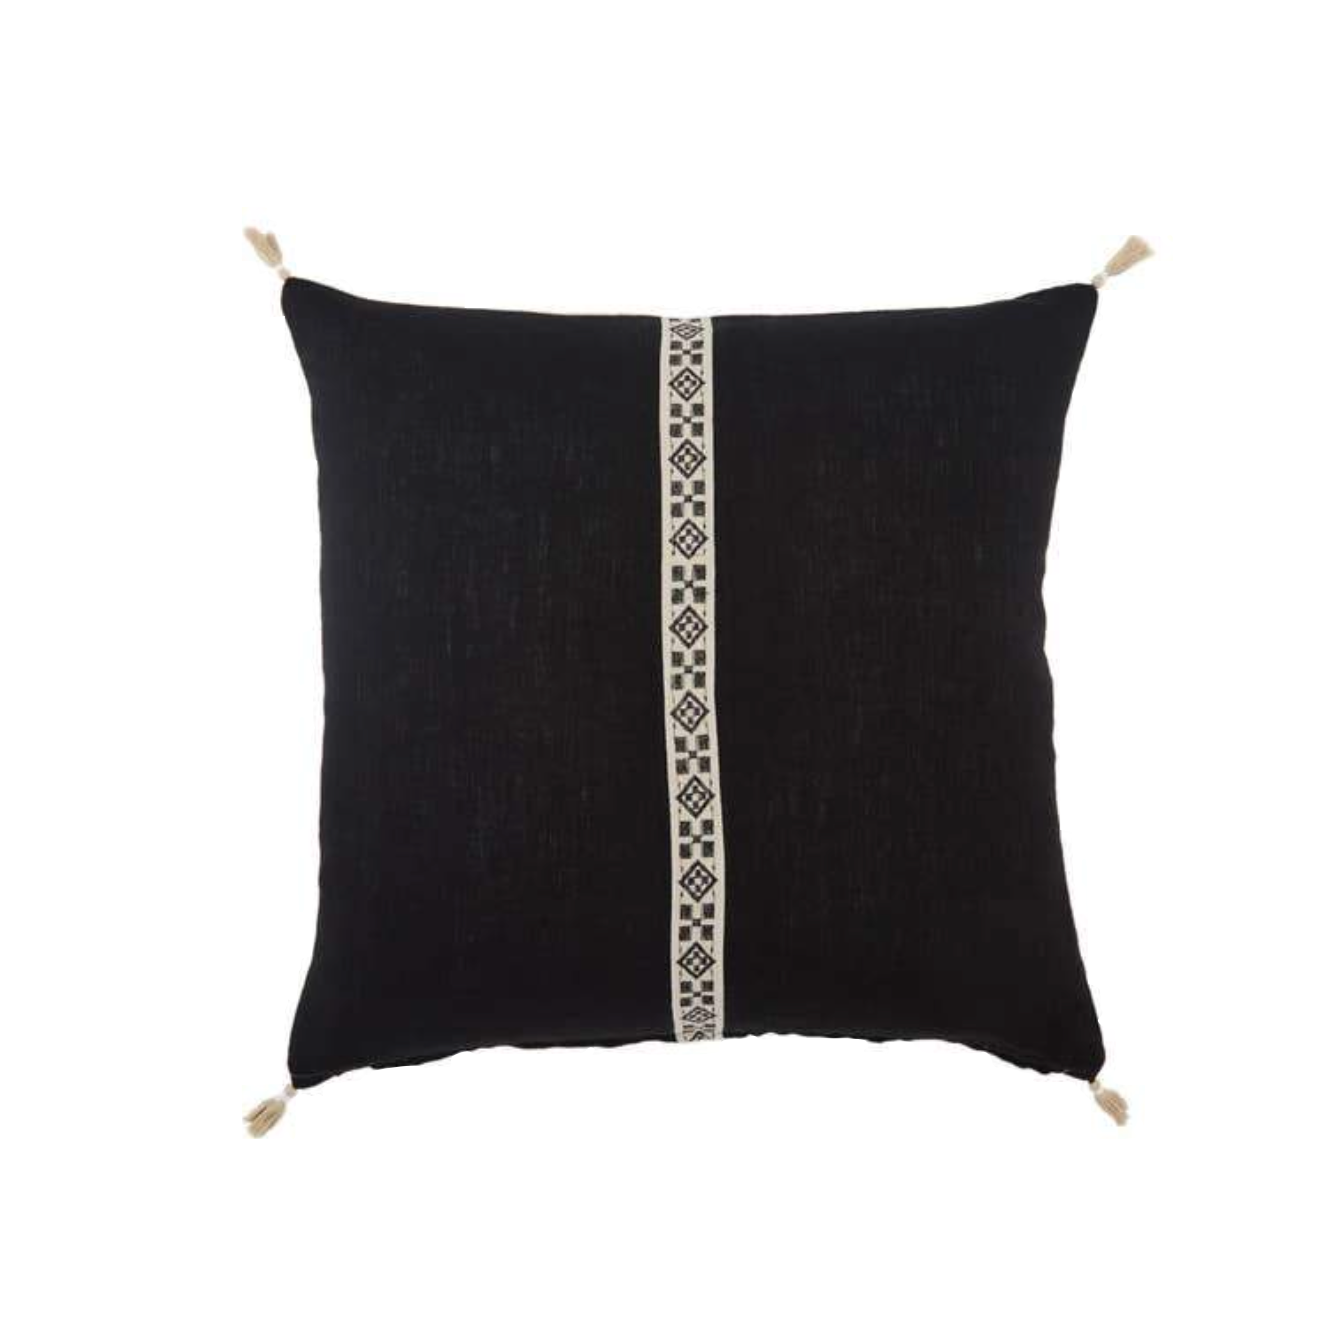 The Loma Pillow has cute tassels found on all four corners with a cute, detail stripe found in the middle. Place on your bed or sofa, this jet black pillow will bring the whole room some texture and pop color. Insert is made with 100% down.   Size: 22